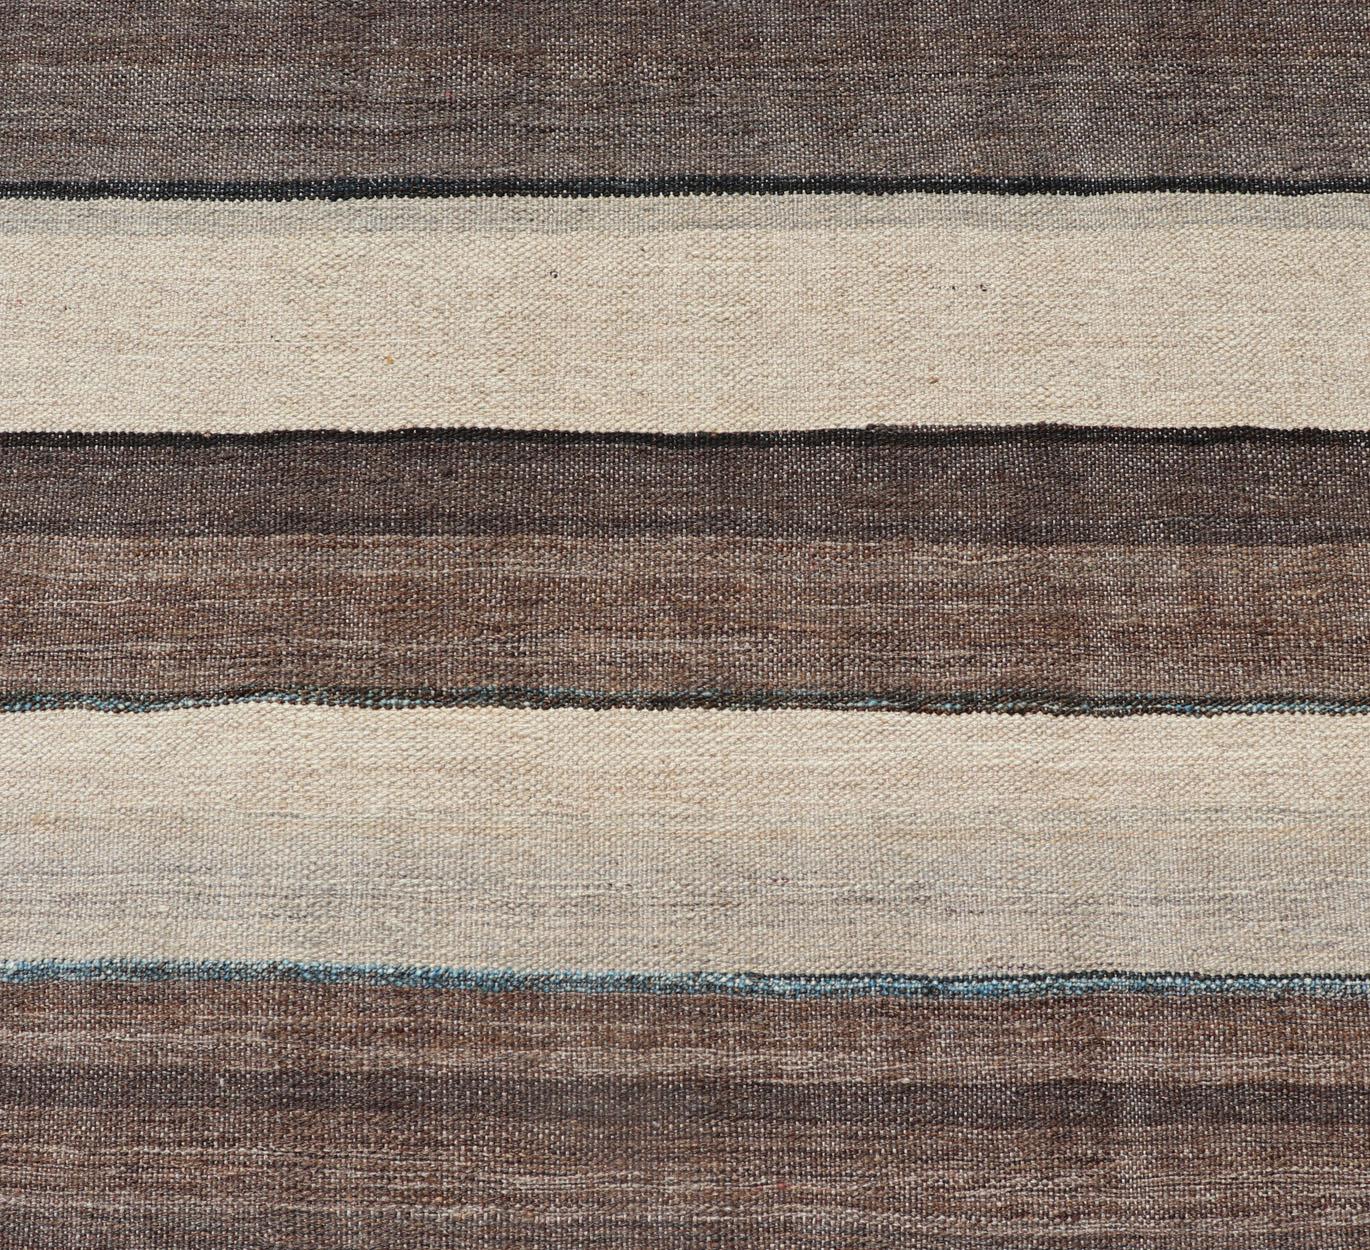 Modern Kilim Rug with Stripes in Shades of Blue, Taupe, Gray and Cream Runner 1